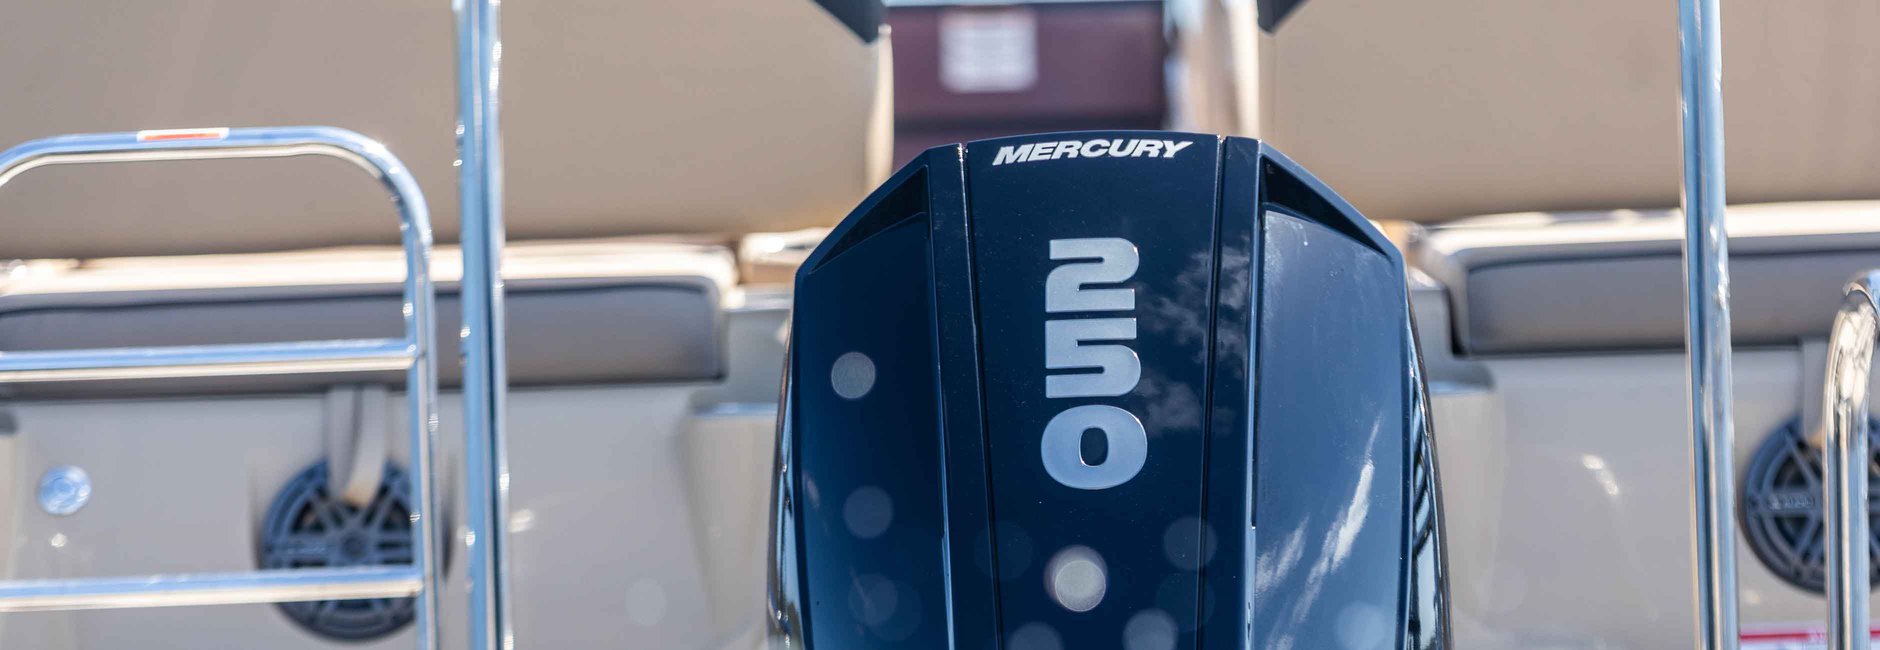 Close-up view of the front of a Mercury Marine outboard engine.